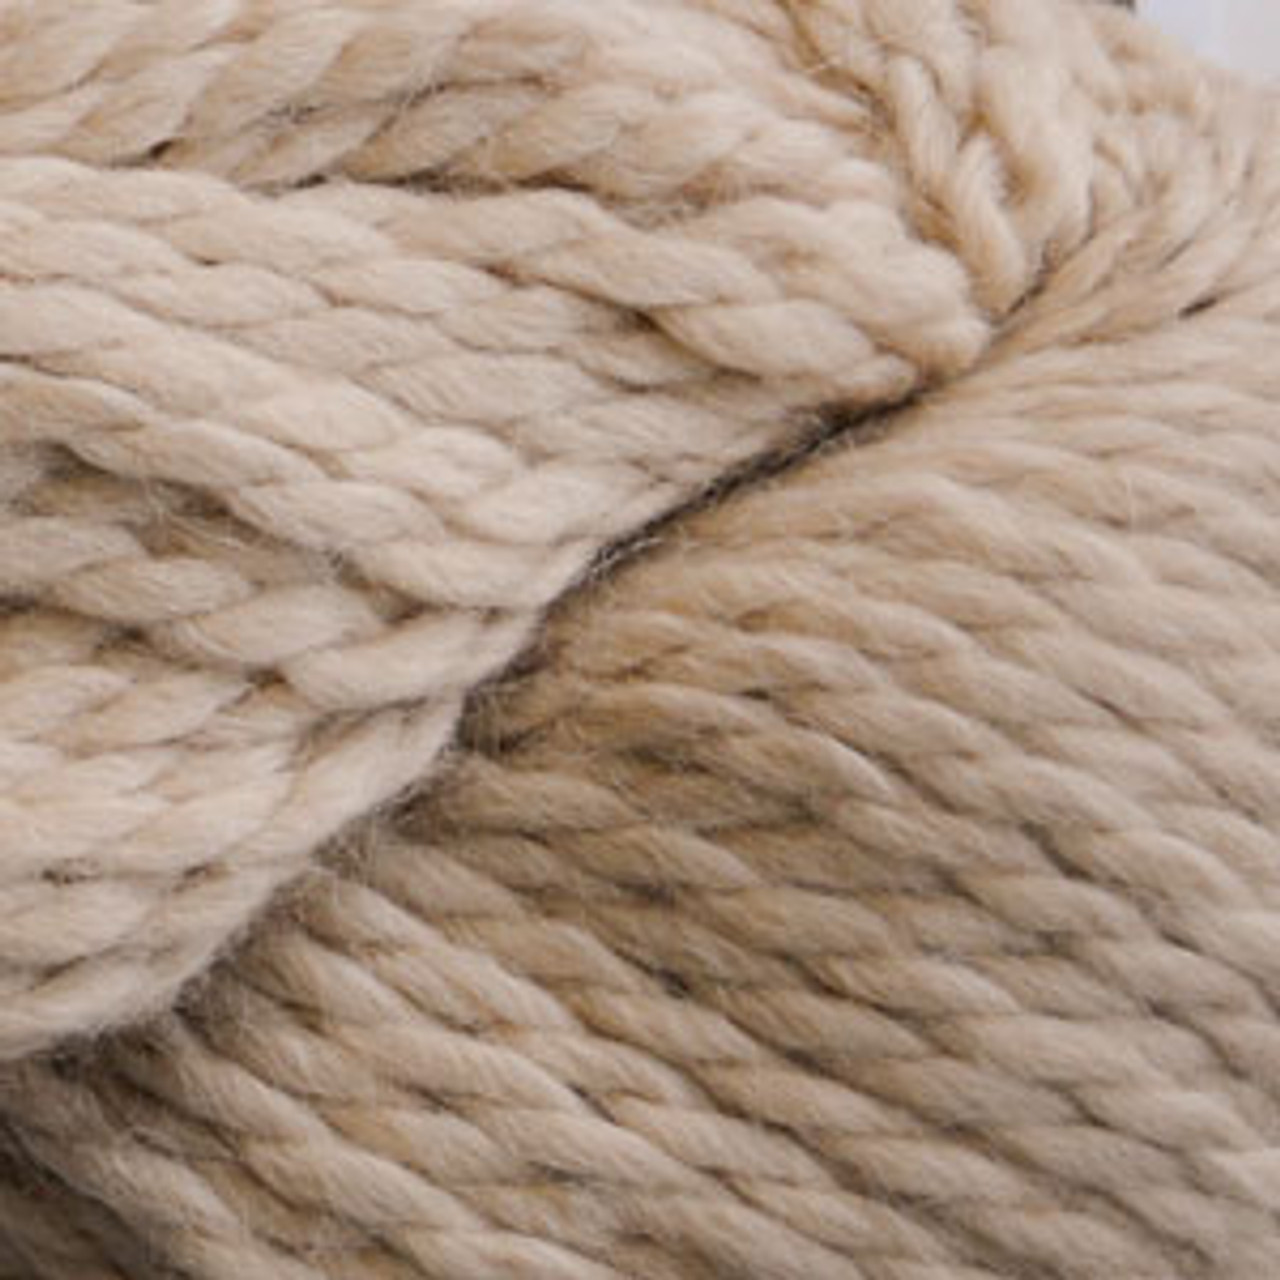 all about BABY ALPACA wool